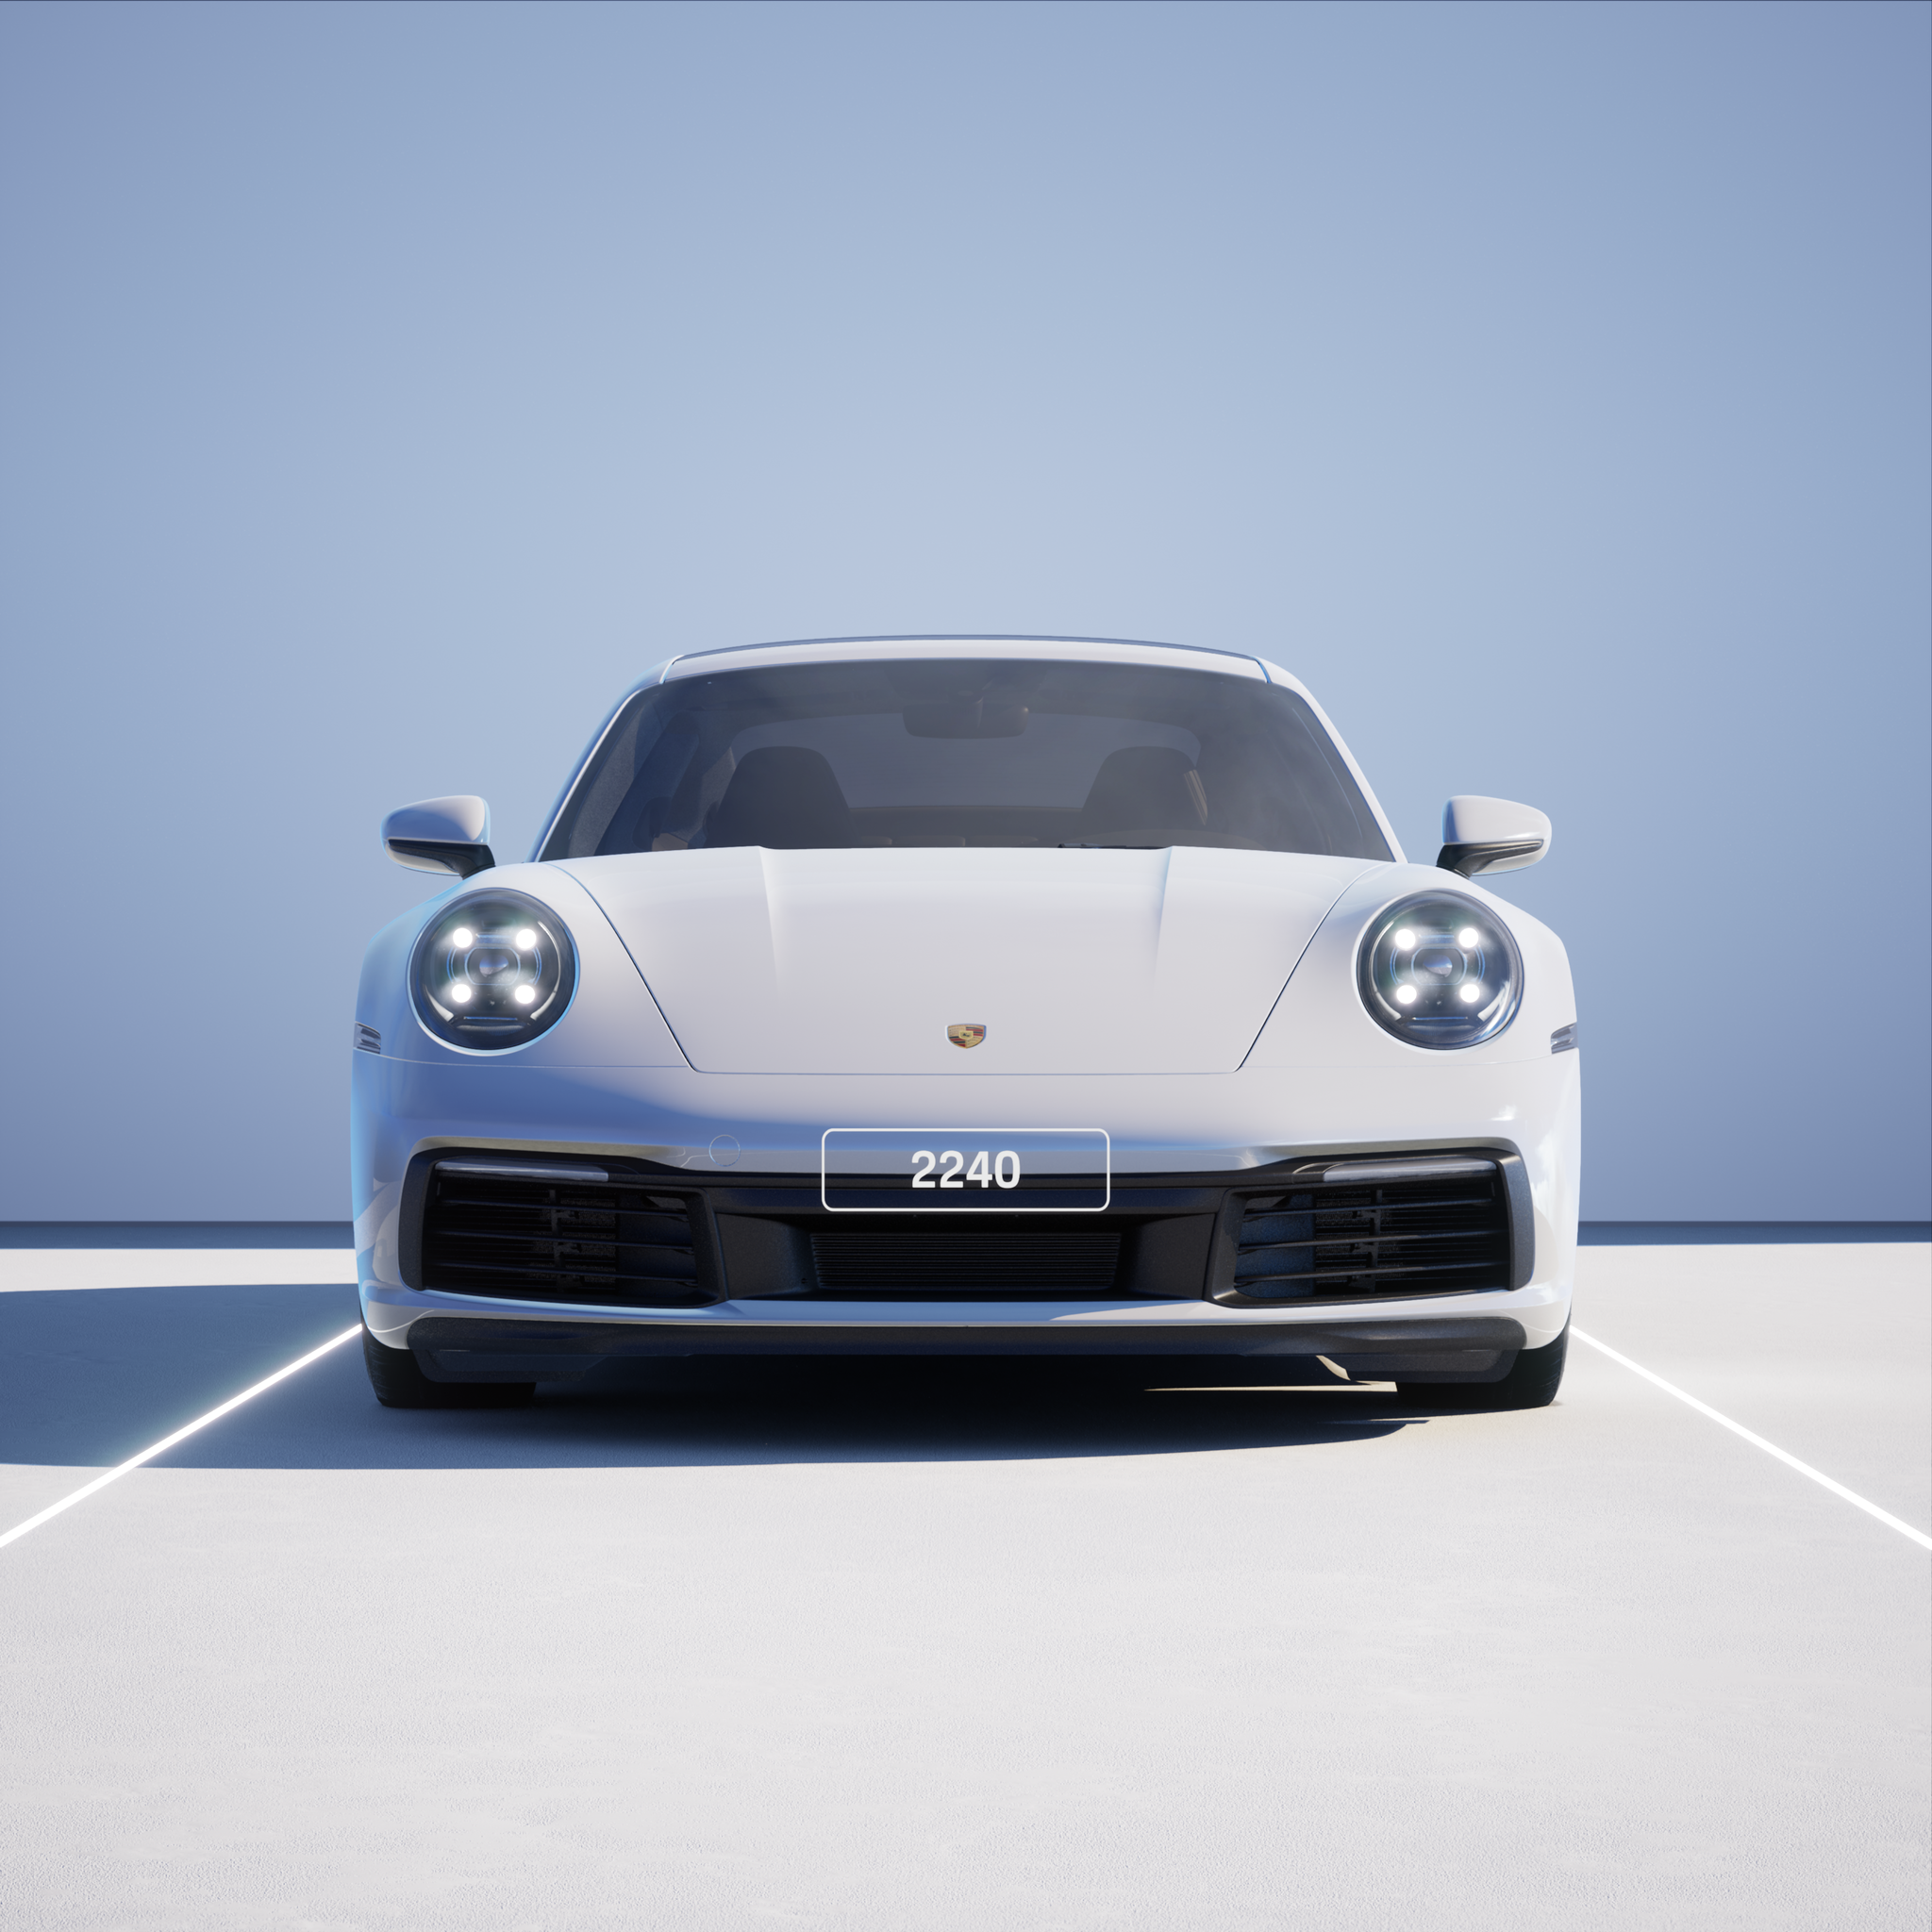 The PORSCHΞ 911 2240 image in phase